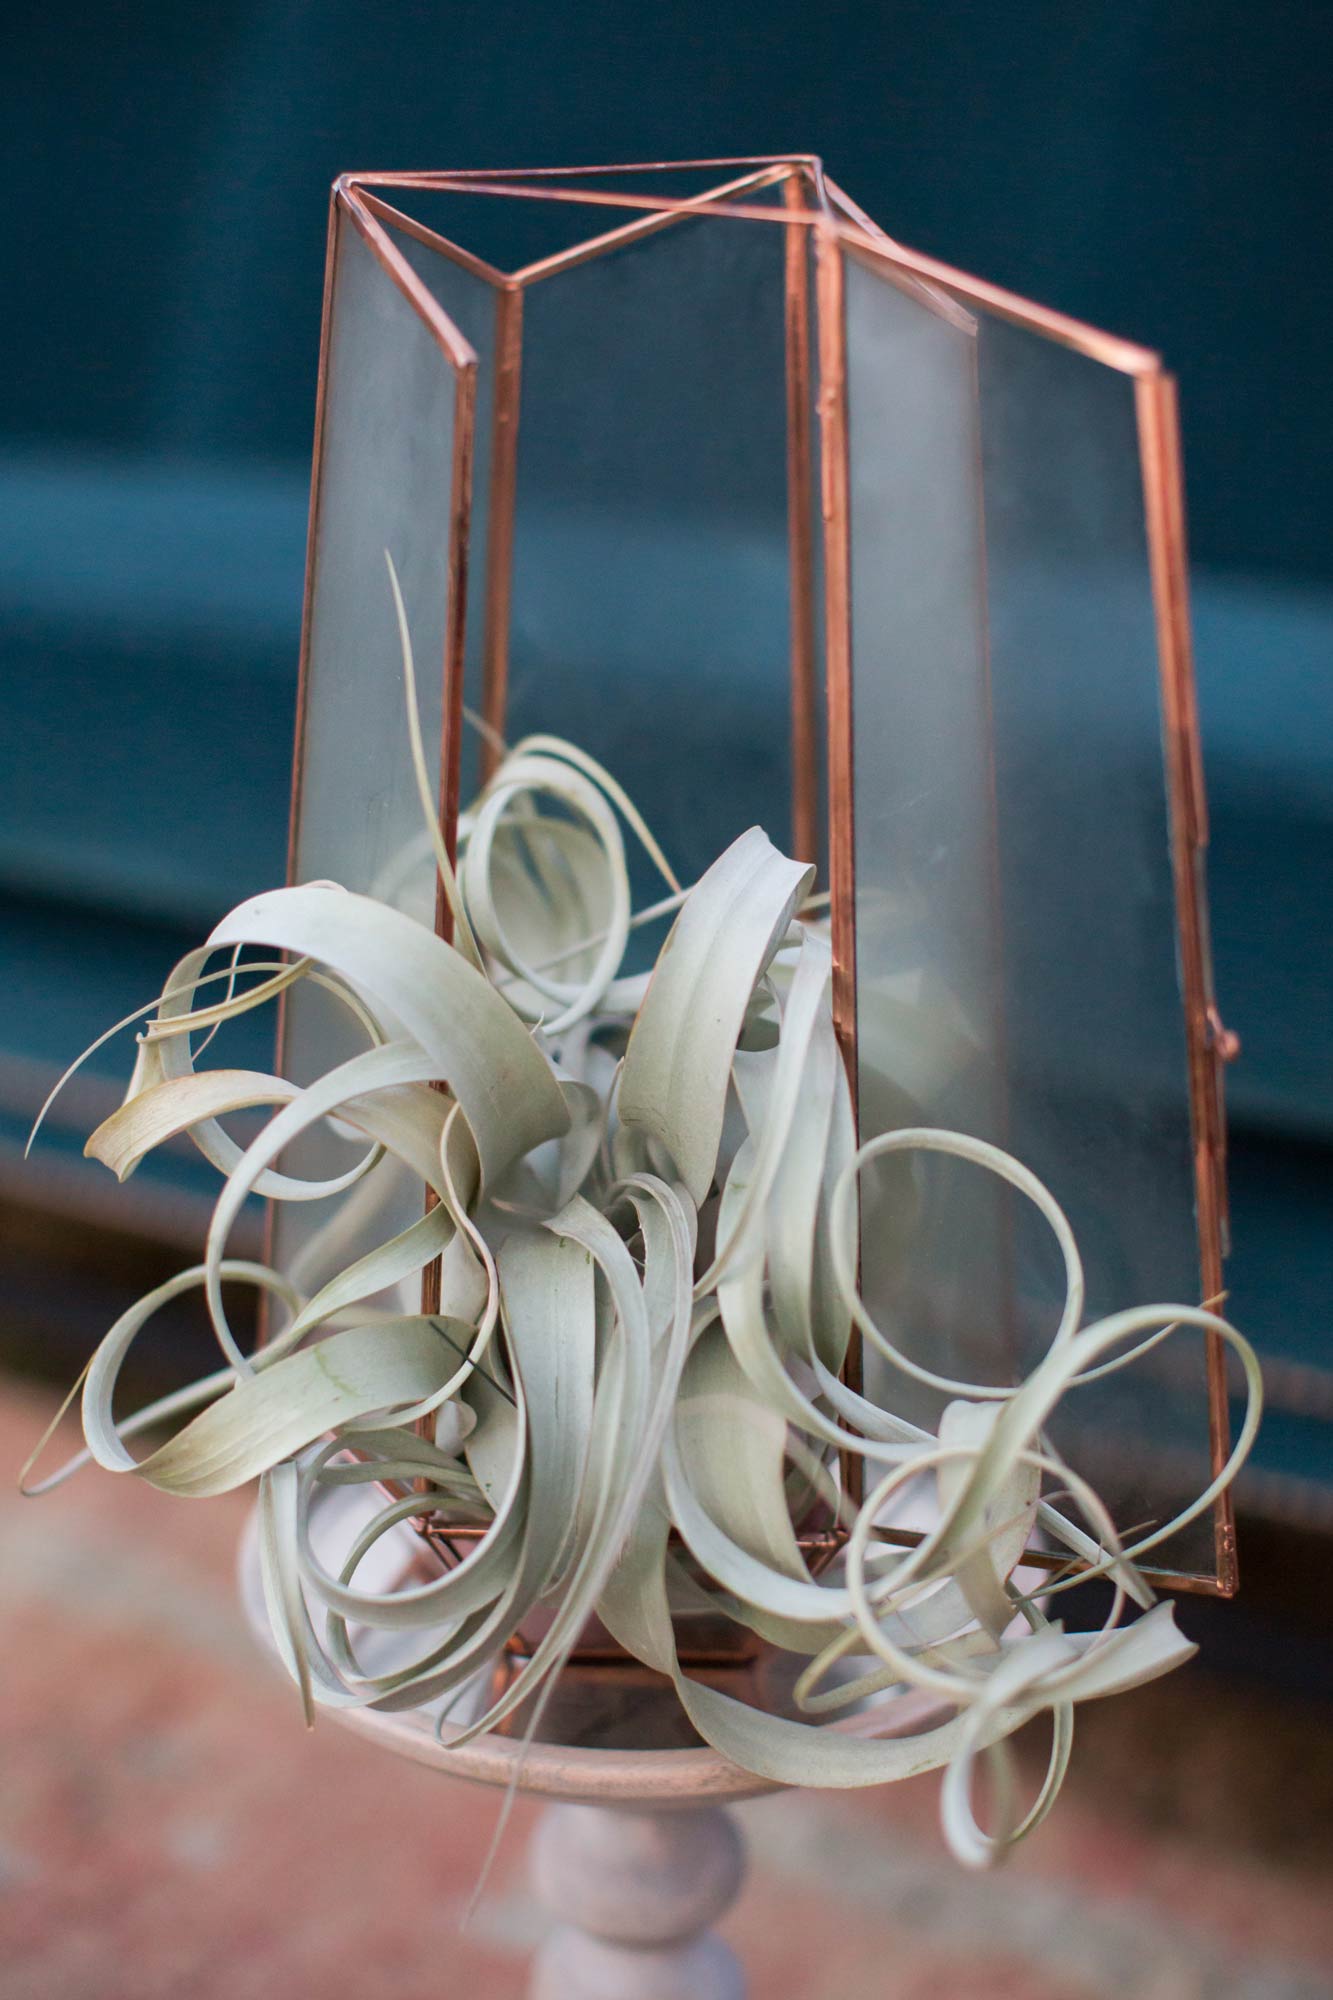 close up of an air plant arranged in a glass and pedestal setting